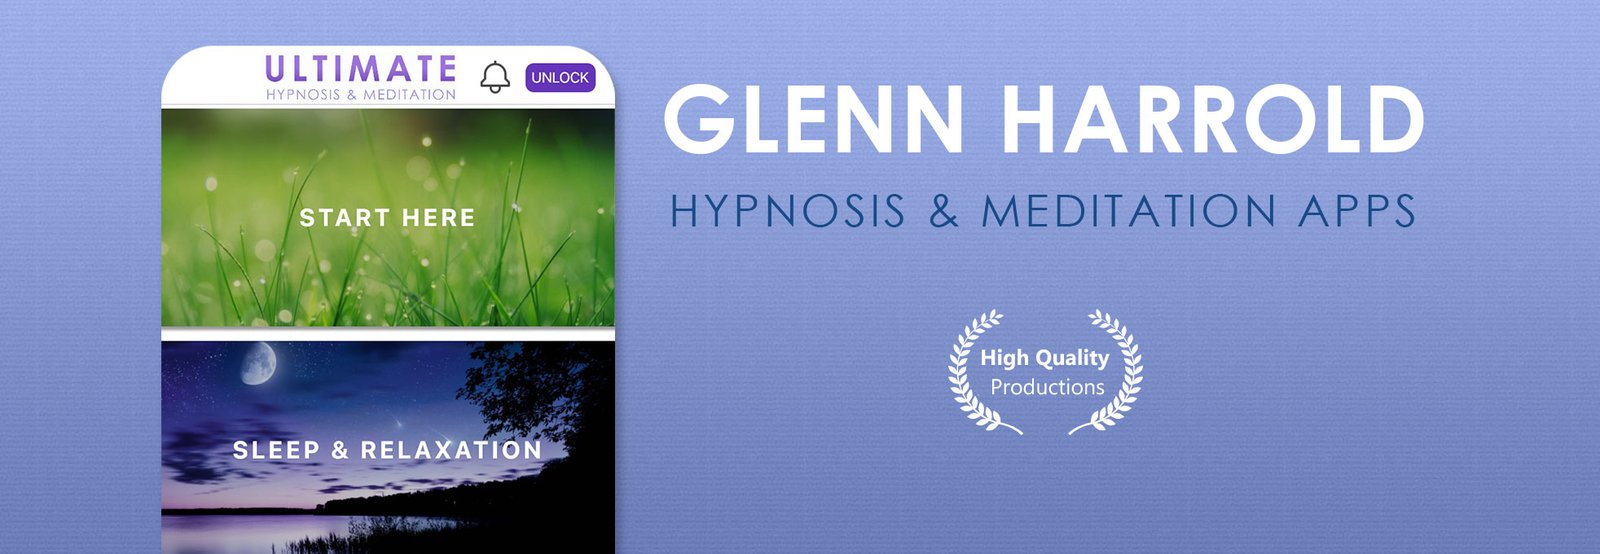 Ultimate Hypnosis and Meditation App